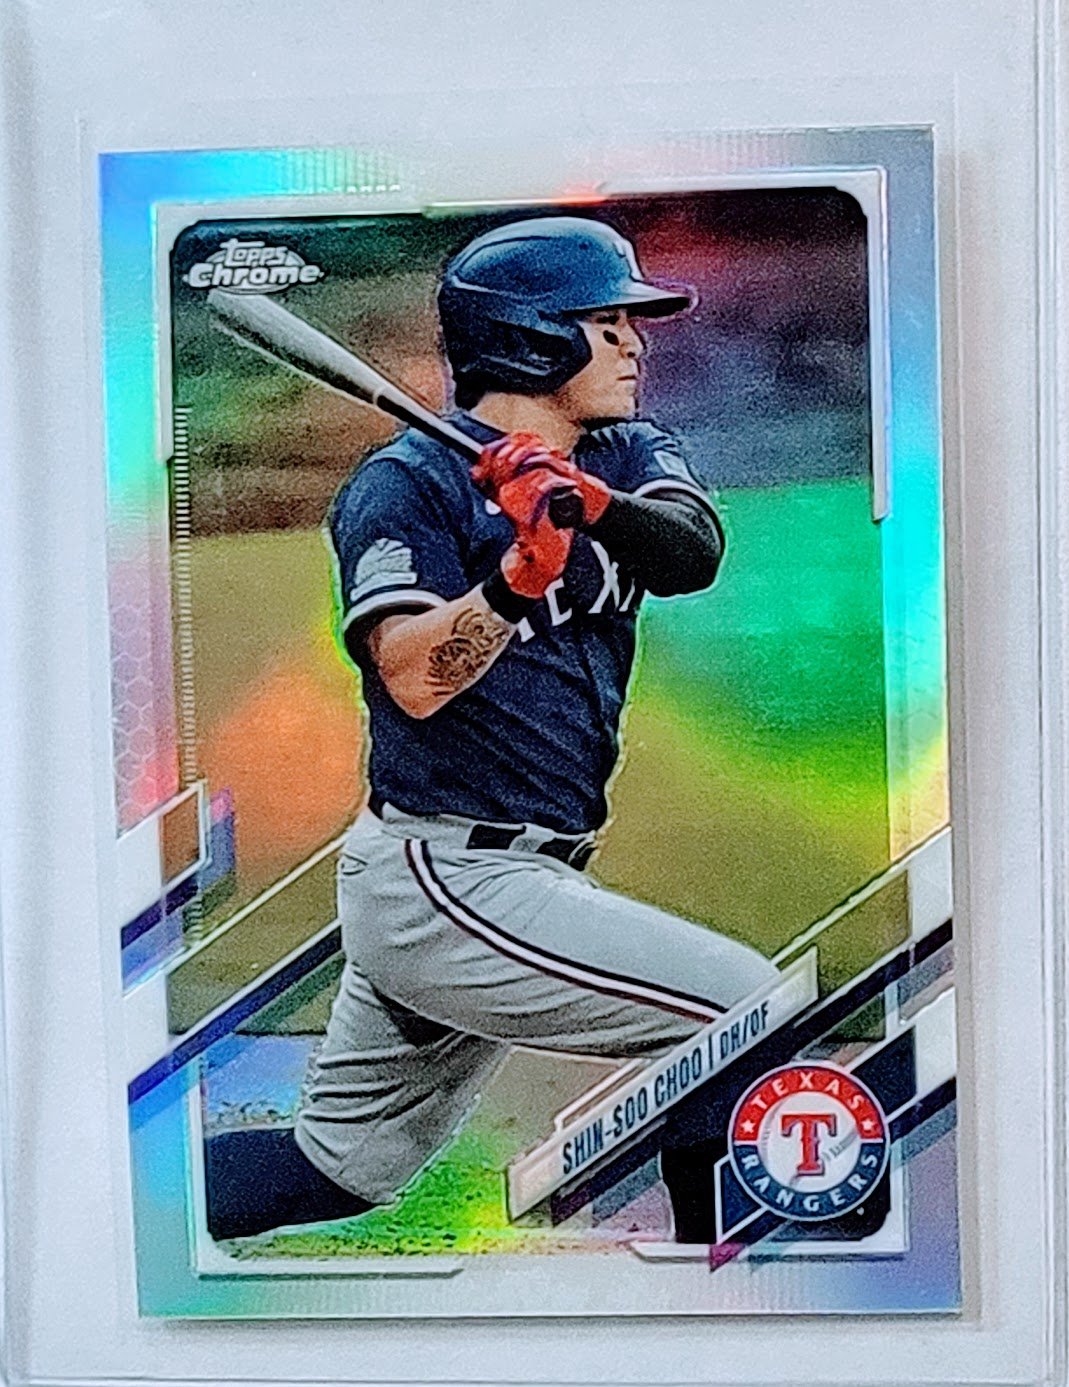 2021 Topps Chrome Sin-Soo Choo Refractor Baseball Trading Card TPTV simple Xclusive Collectibles   